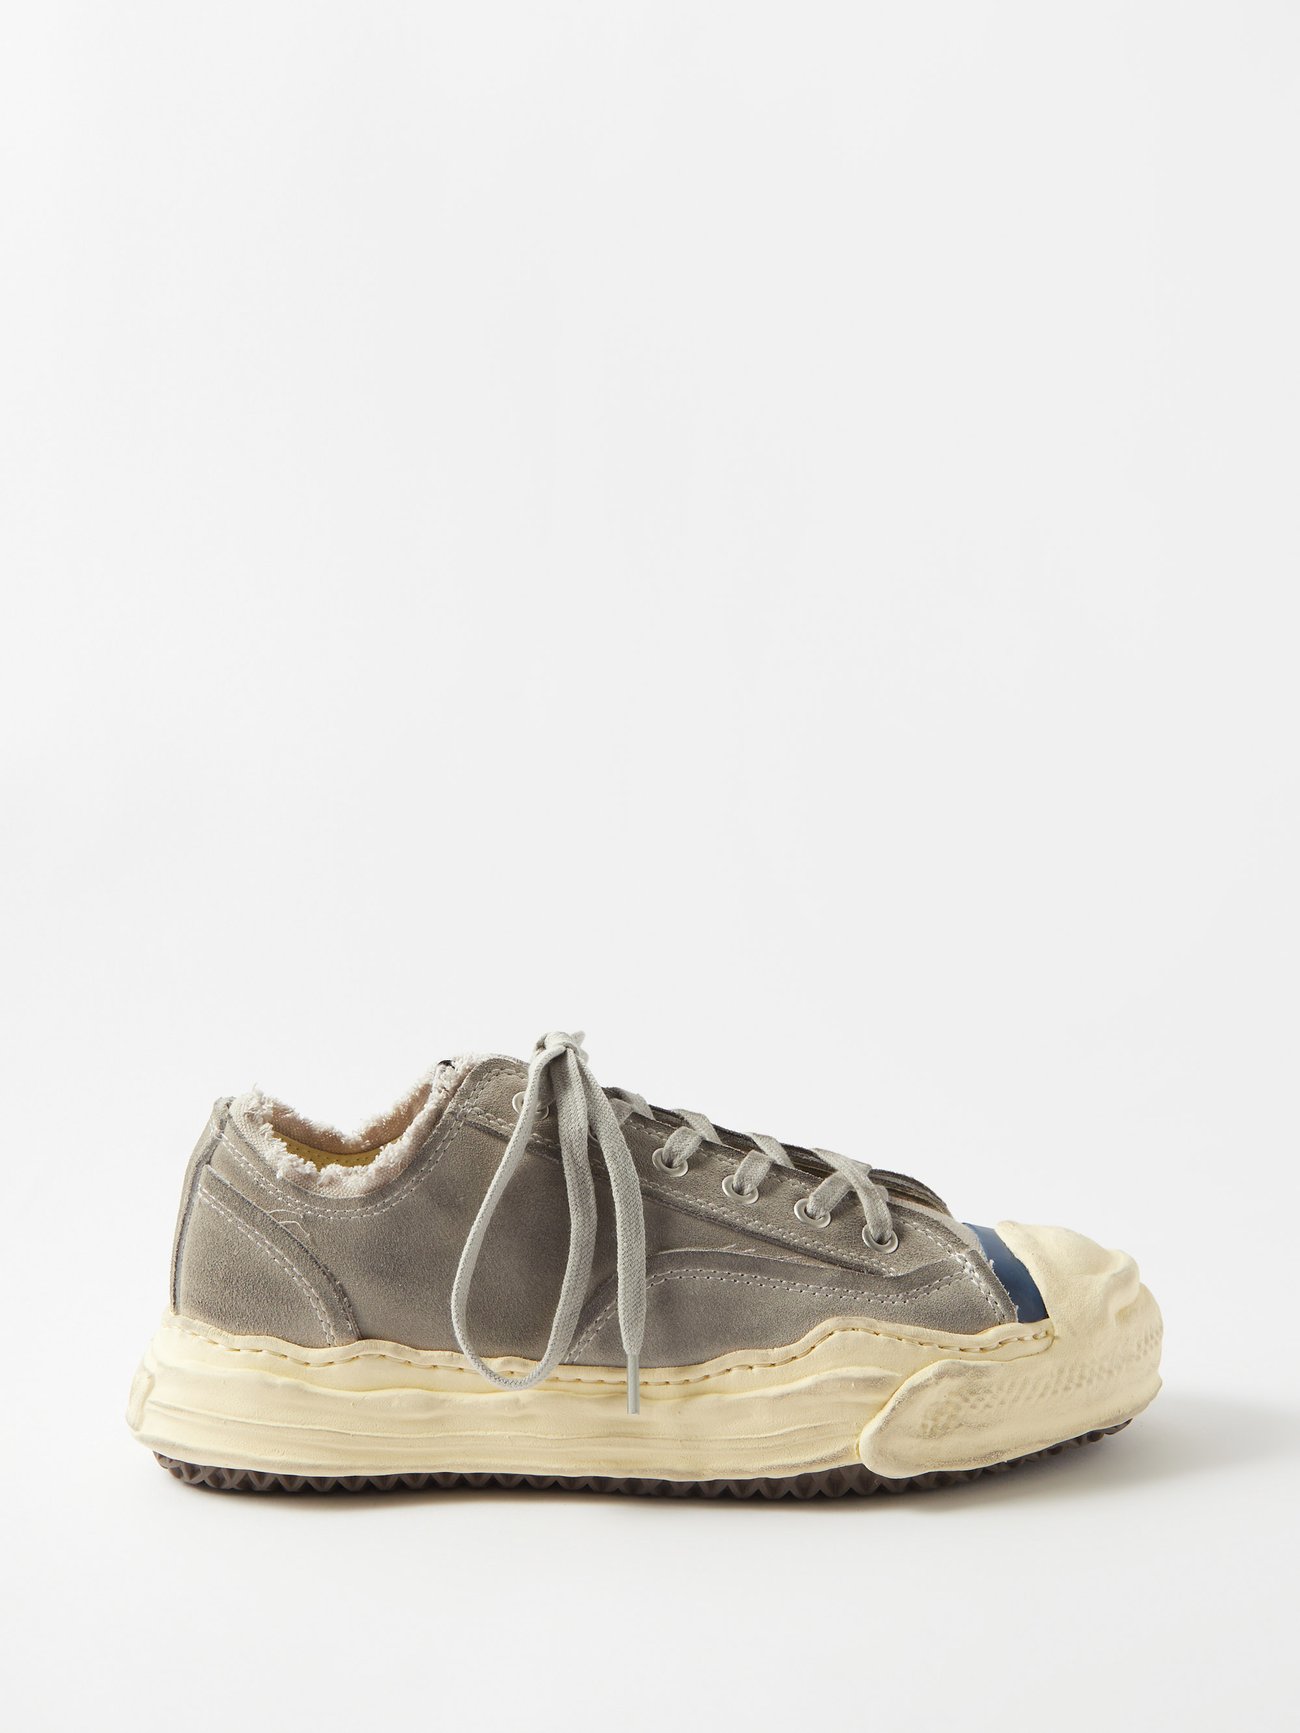 Grey X BED j.w. FORD Hank Original Sole suede trainers | Mihara